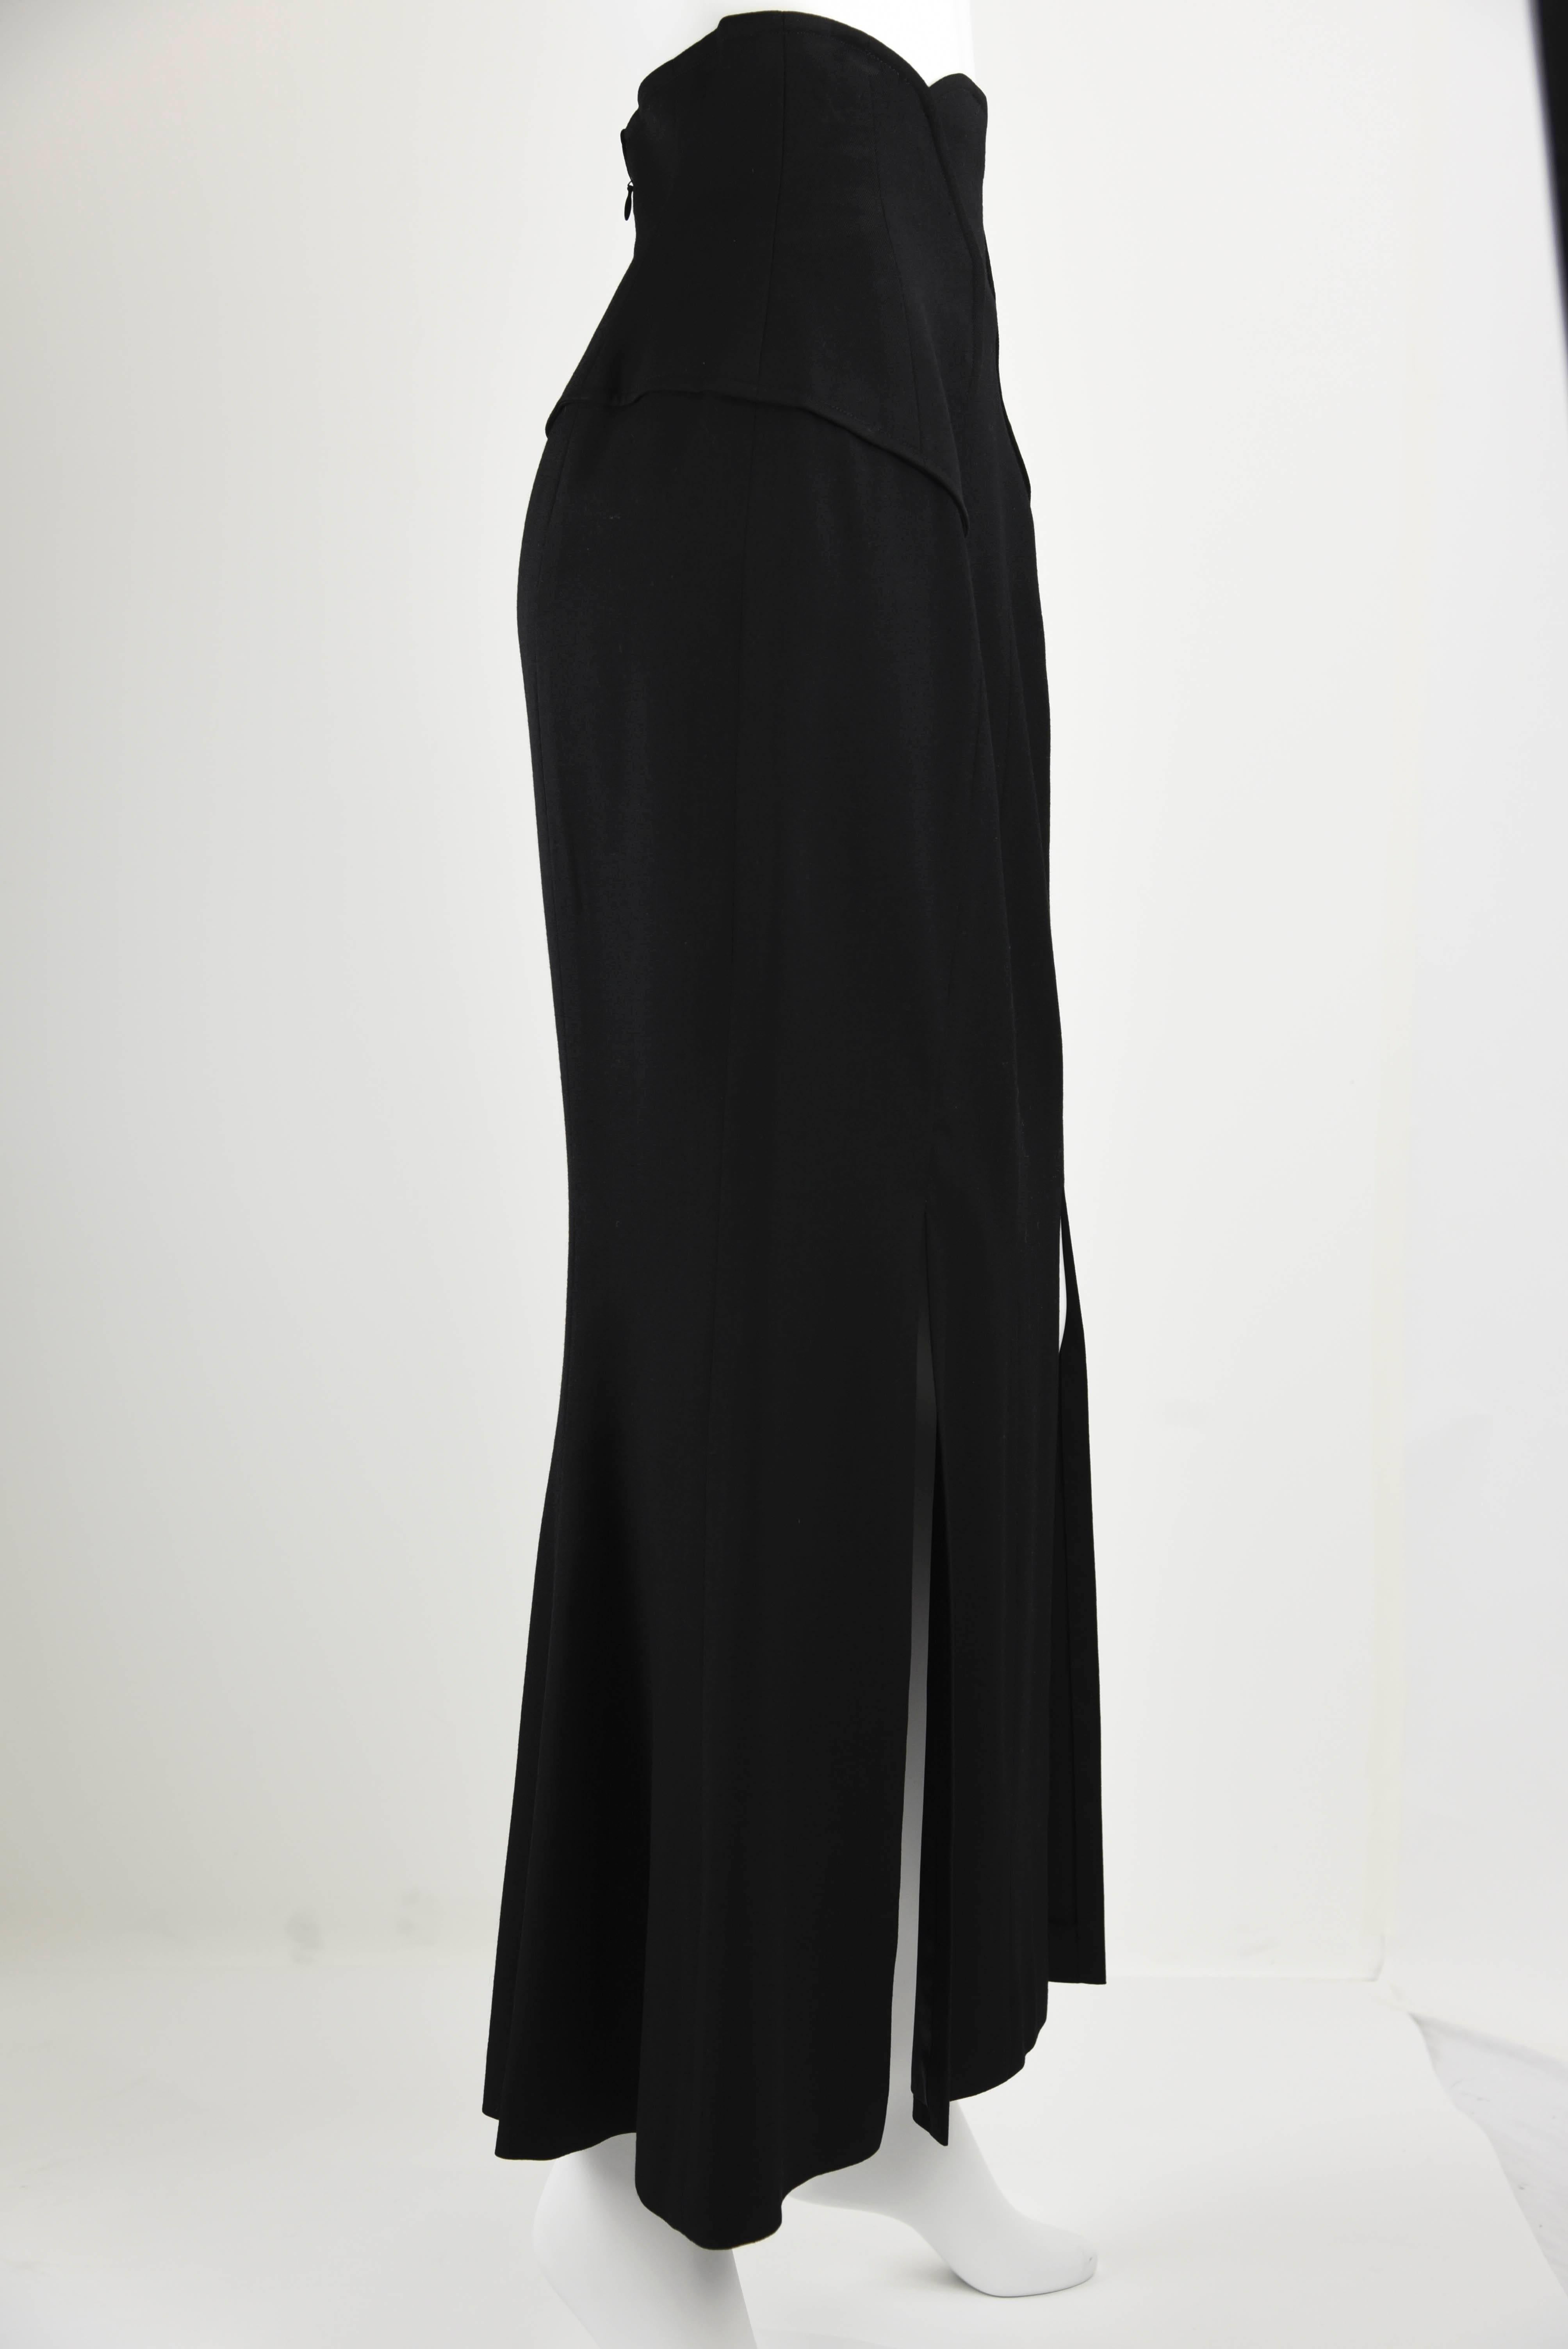 Chanel Boutique 1980's Long Black Skirt With Front Slits and Waist Detail FR 40 In Excellent Condition For Sale In Portland, OR